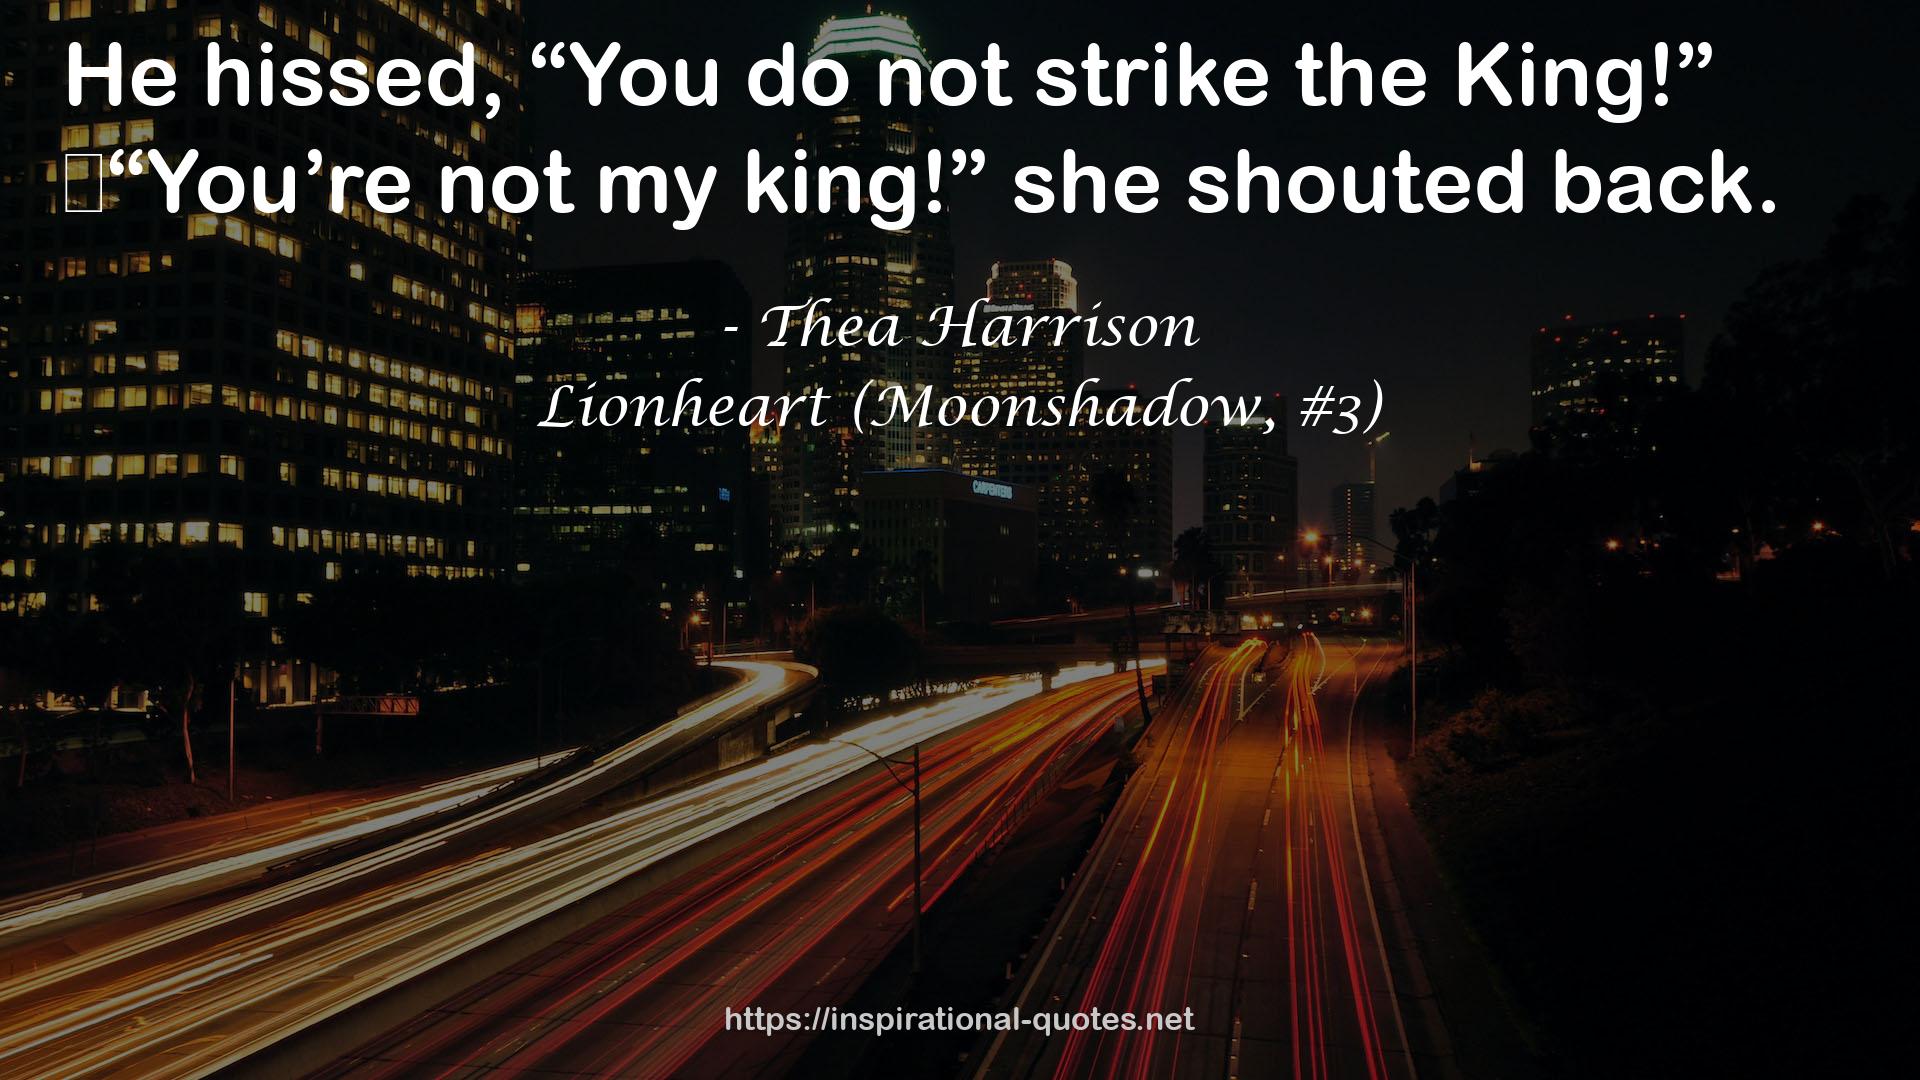 Lionheart (Moonshadow, #3) QUOTES